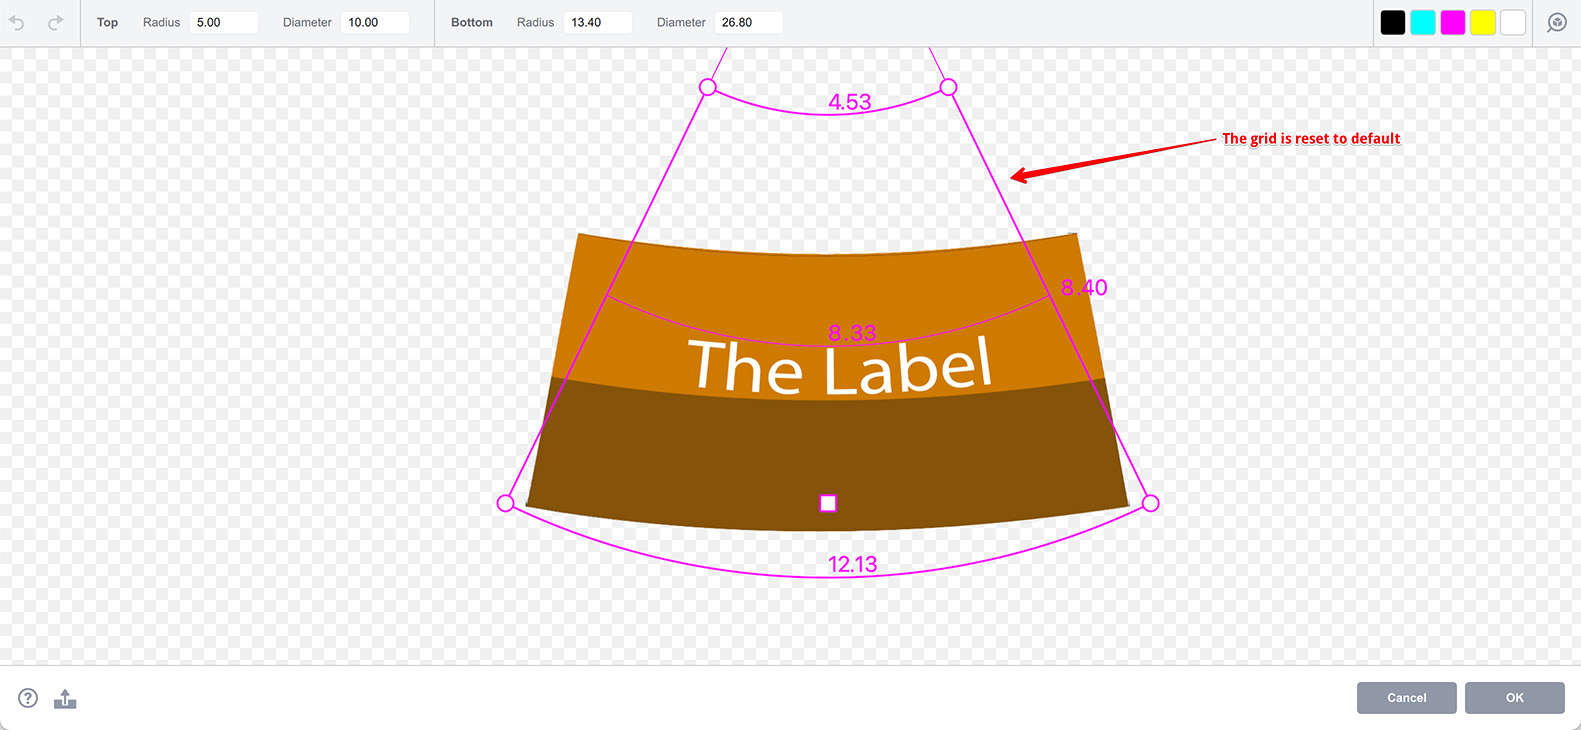 Conical label frame is reset to defaults